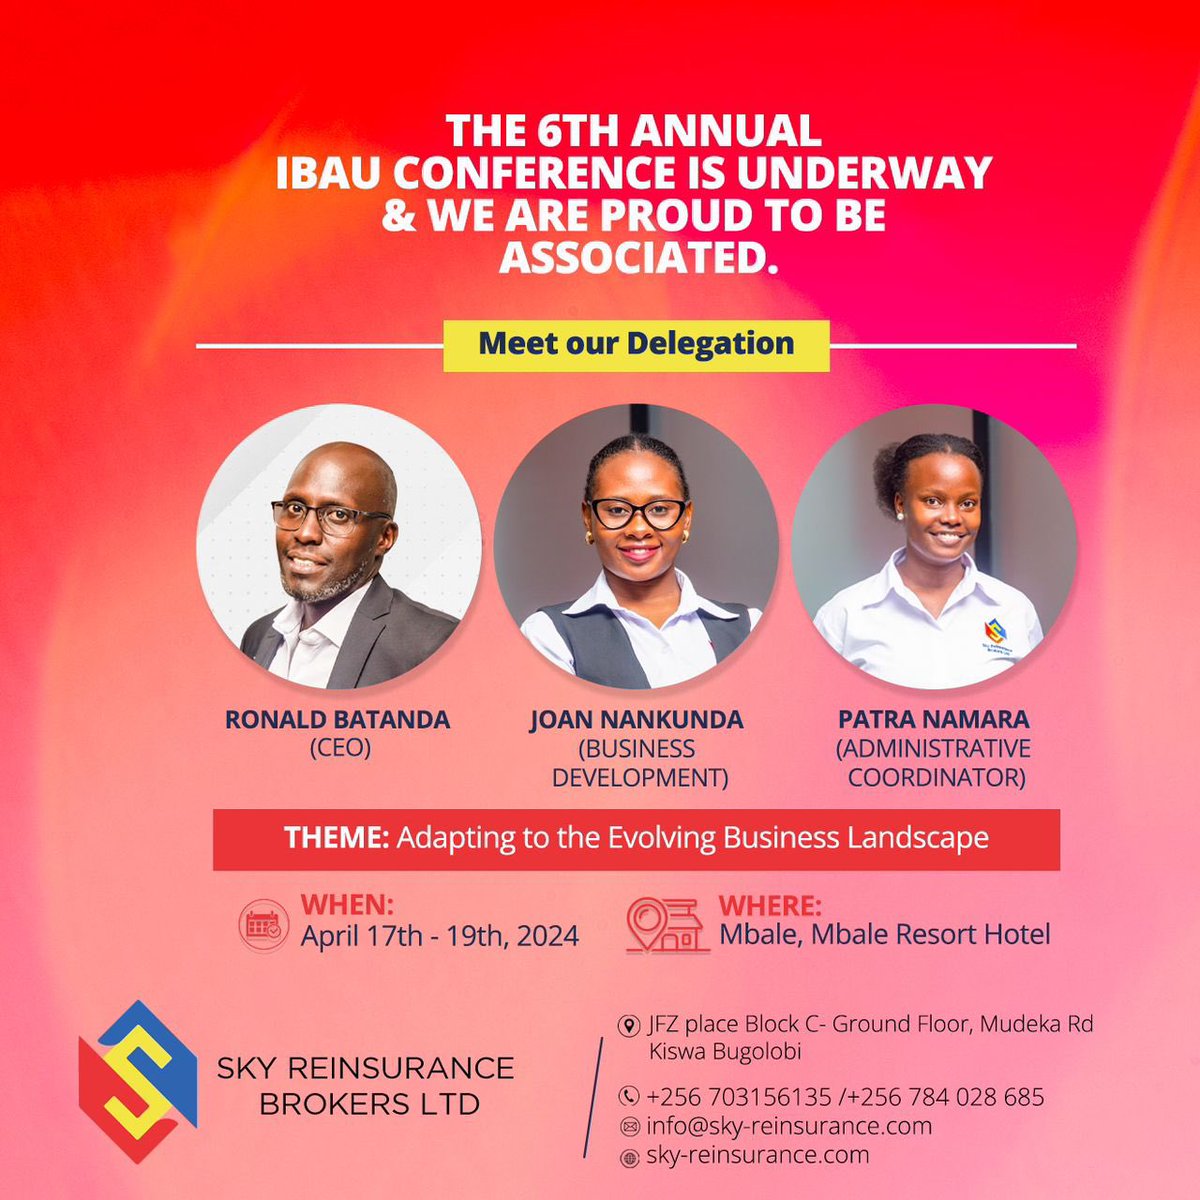 The 6th Annual IBAU Conference is on from April 17th - 19th, 2024 & we are over the moon to be involved! Here’s our delegation; ♟️CEO - Ronald Batanda ♟️Business Development - Joan Nankunda ♟️ Administrative Coordinator - Patra Namara Don’t miss!